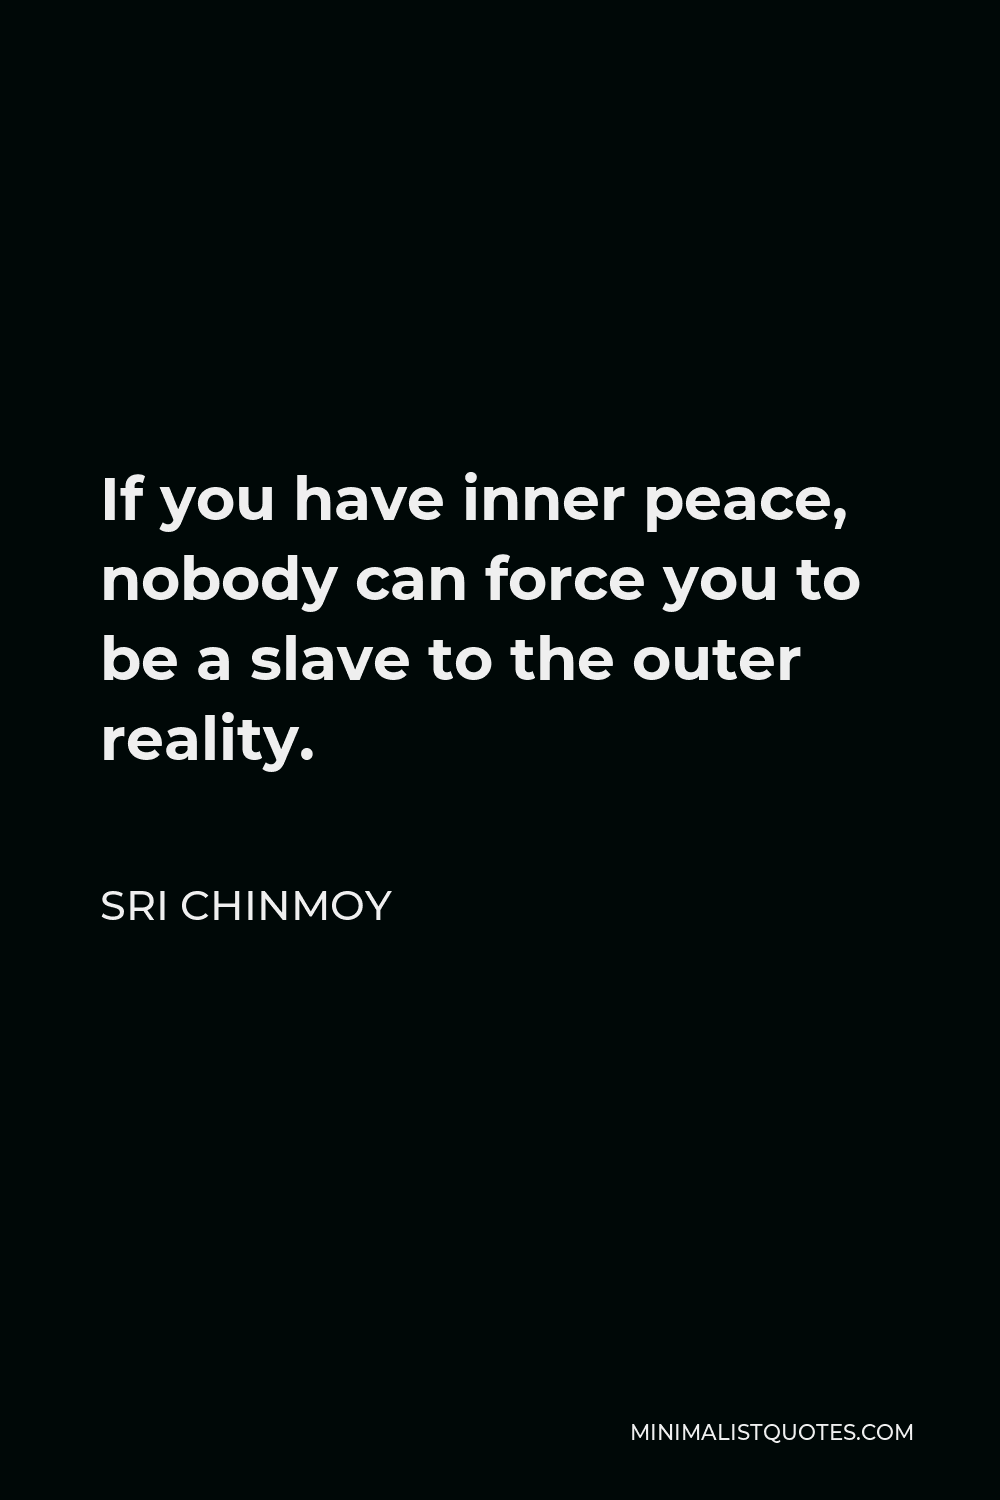 Sri Chinmoy Quote - If you have inner peace, nobody can force you to be a slave to the outer reality.